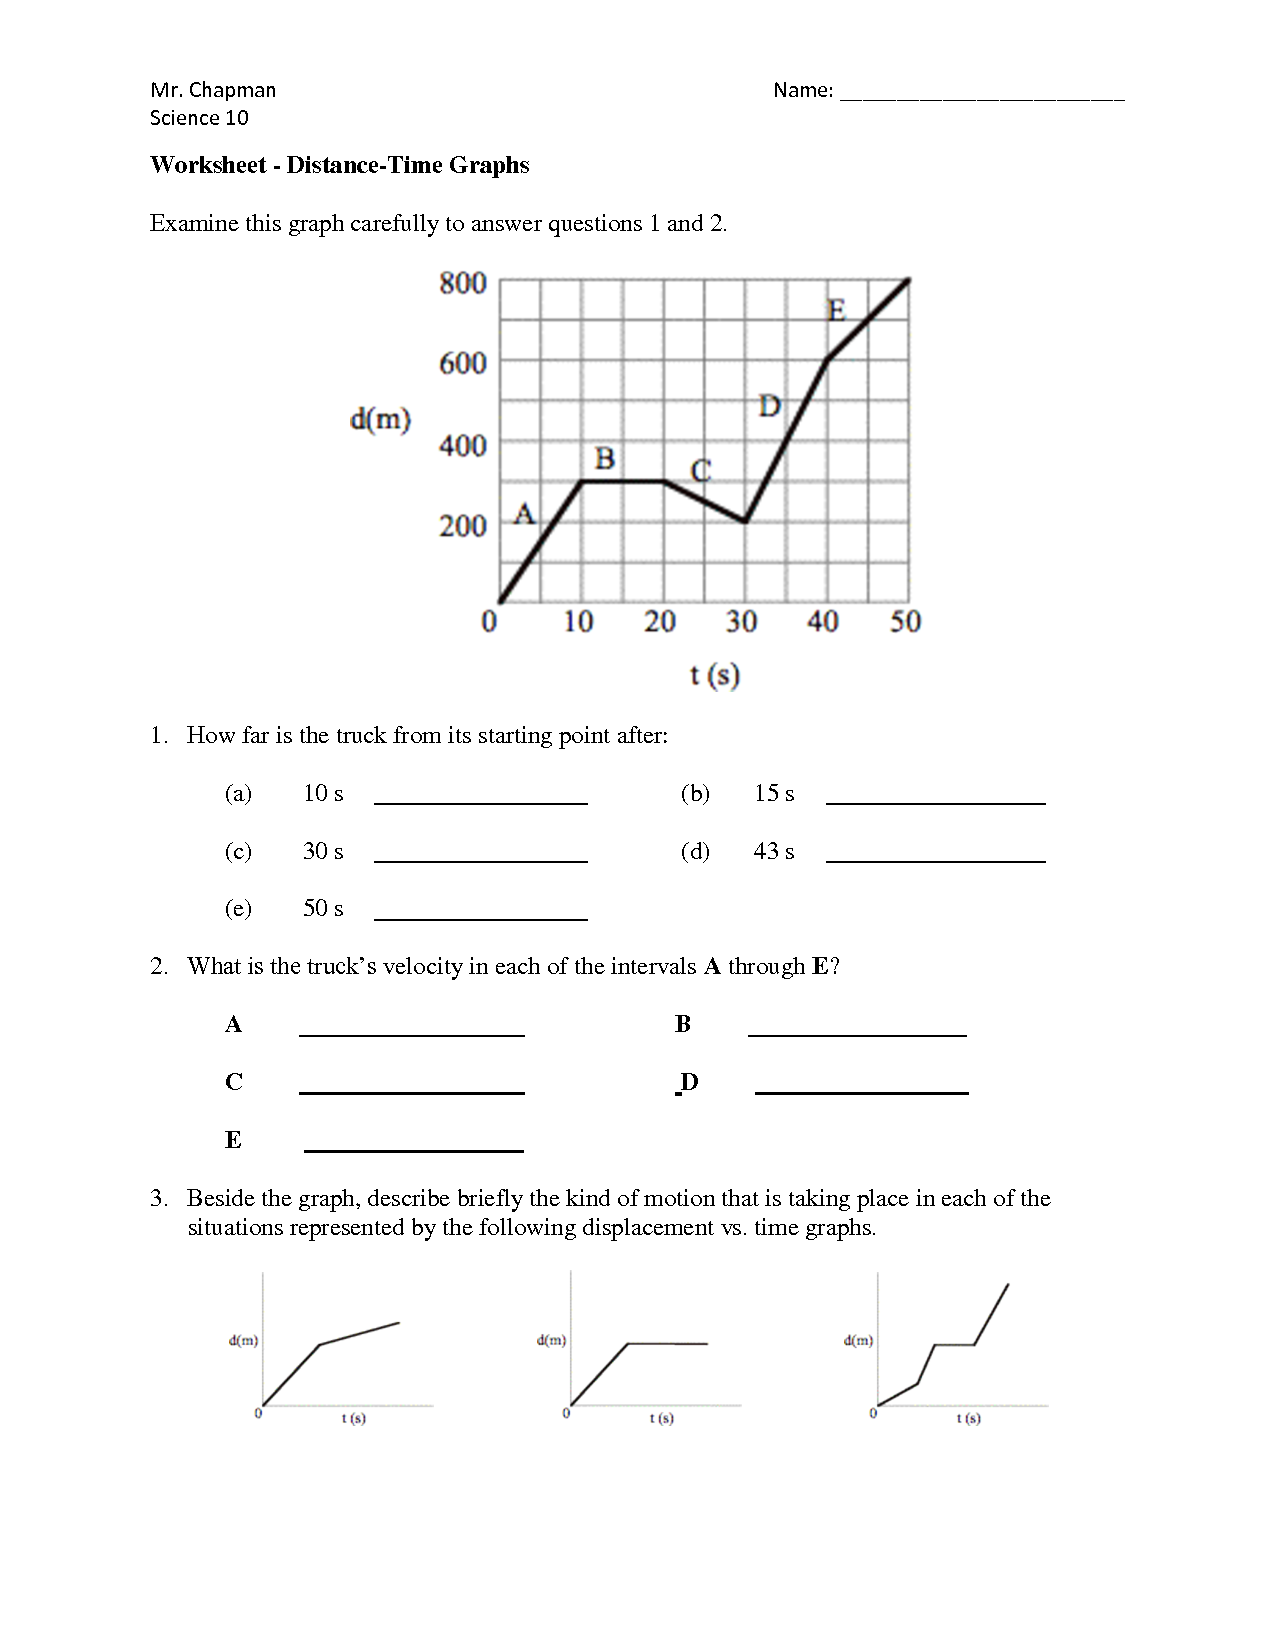 11-best-images-of-speed-distance-graph-worksheet-distance-time-graph-worksheet-distance-v